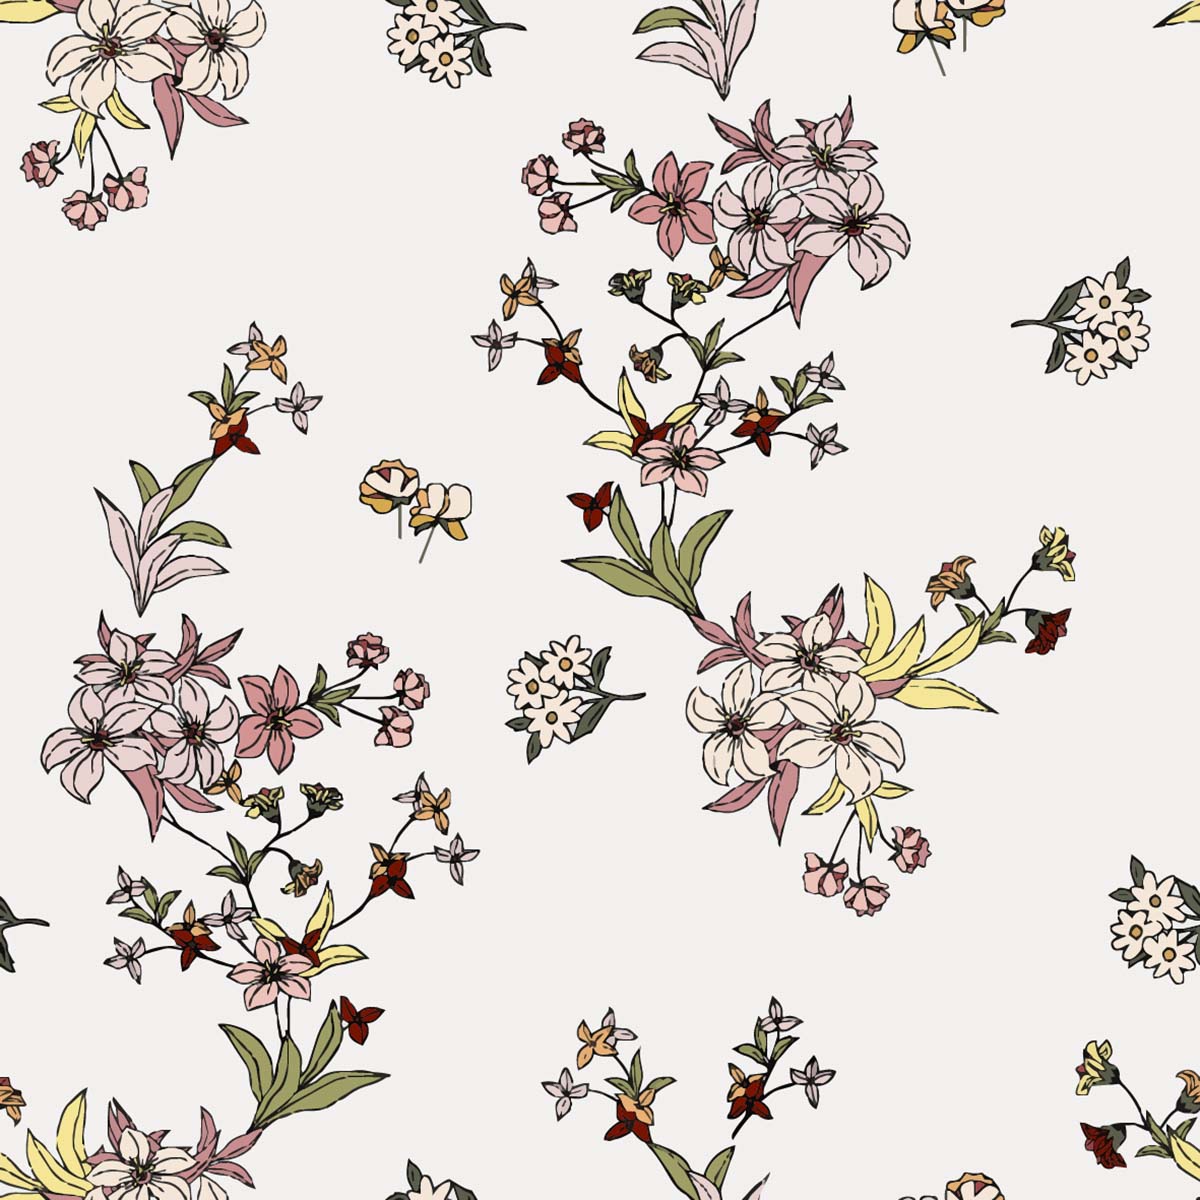 A pattern of flowers and butterflies